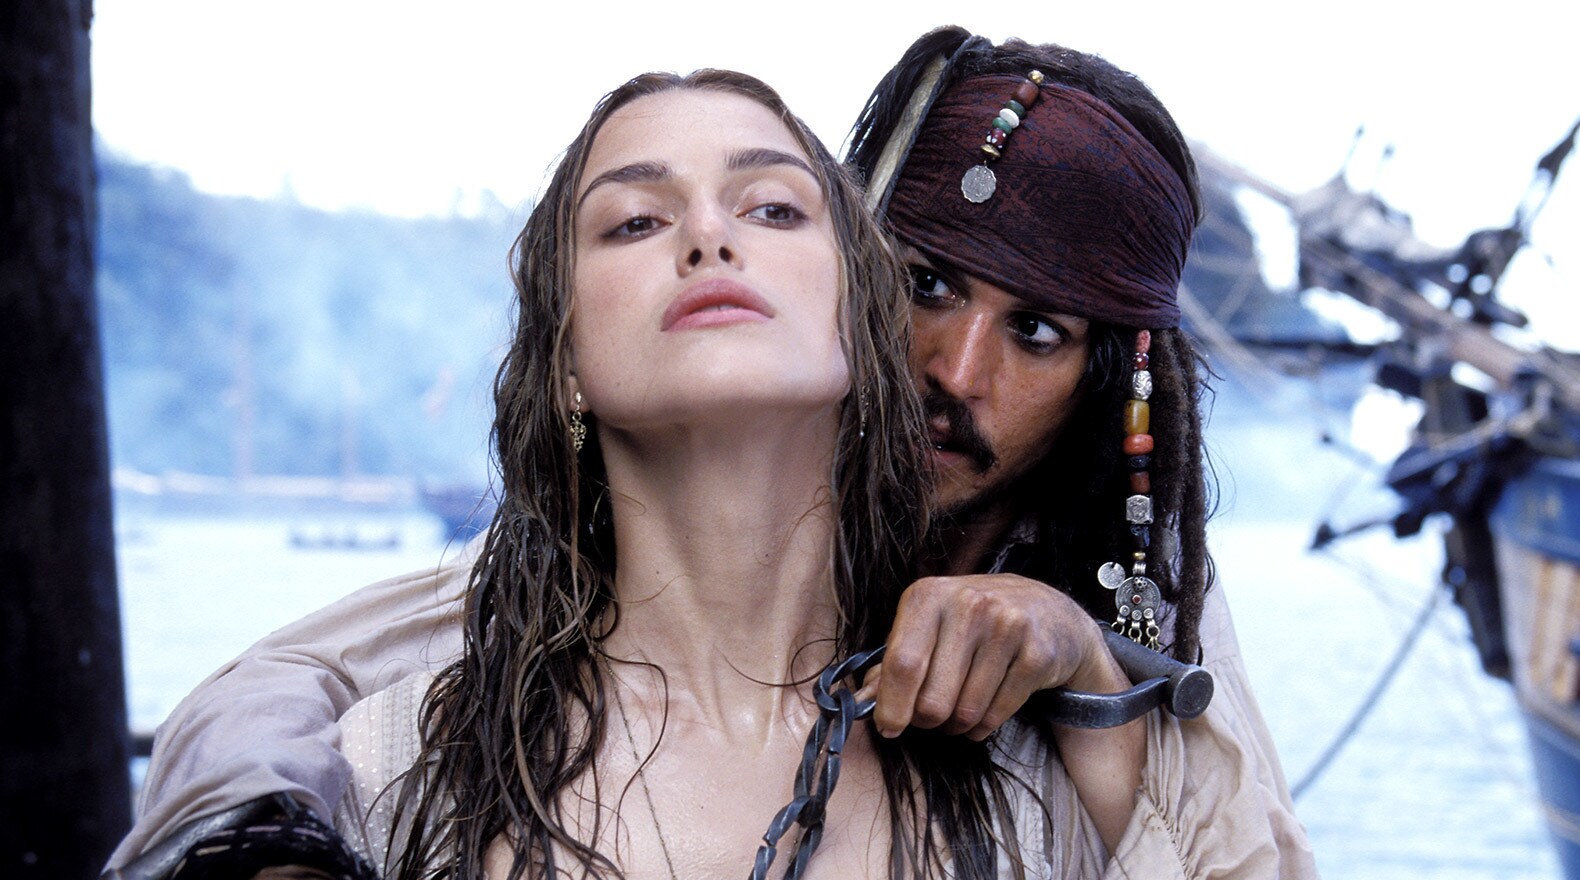 In their first encounter, Captain Jack Sparrow takes Elizabeth Swann hostage to effect an escape.